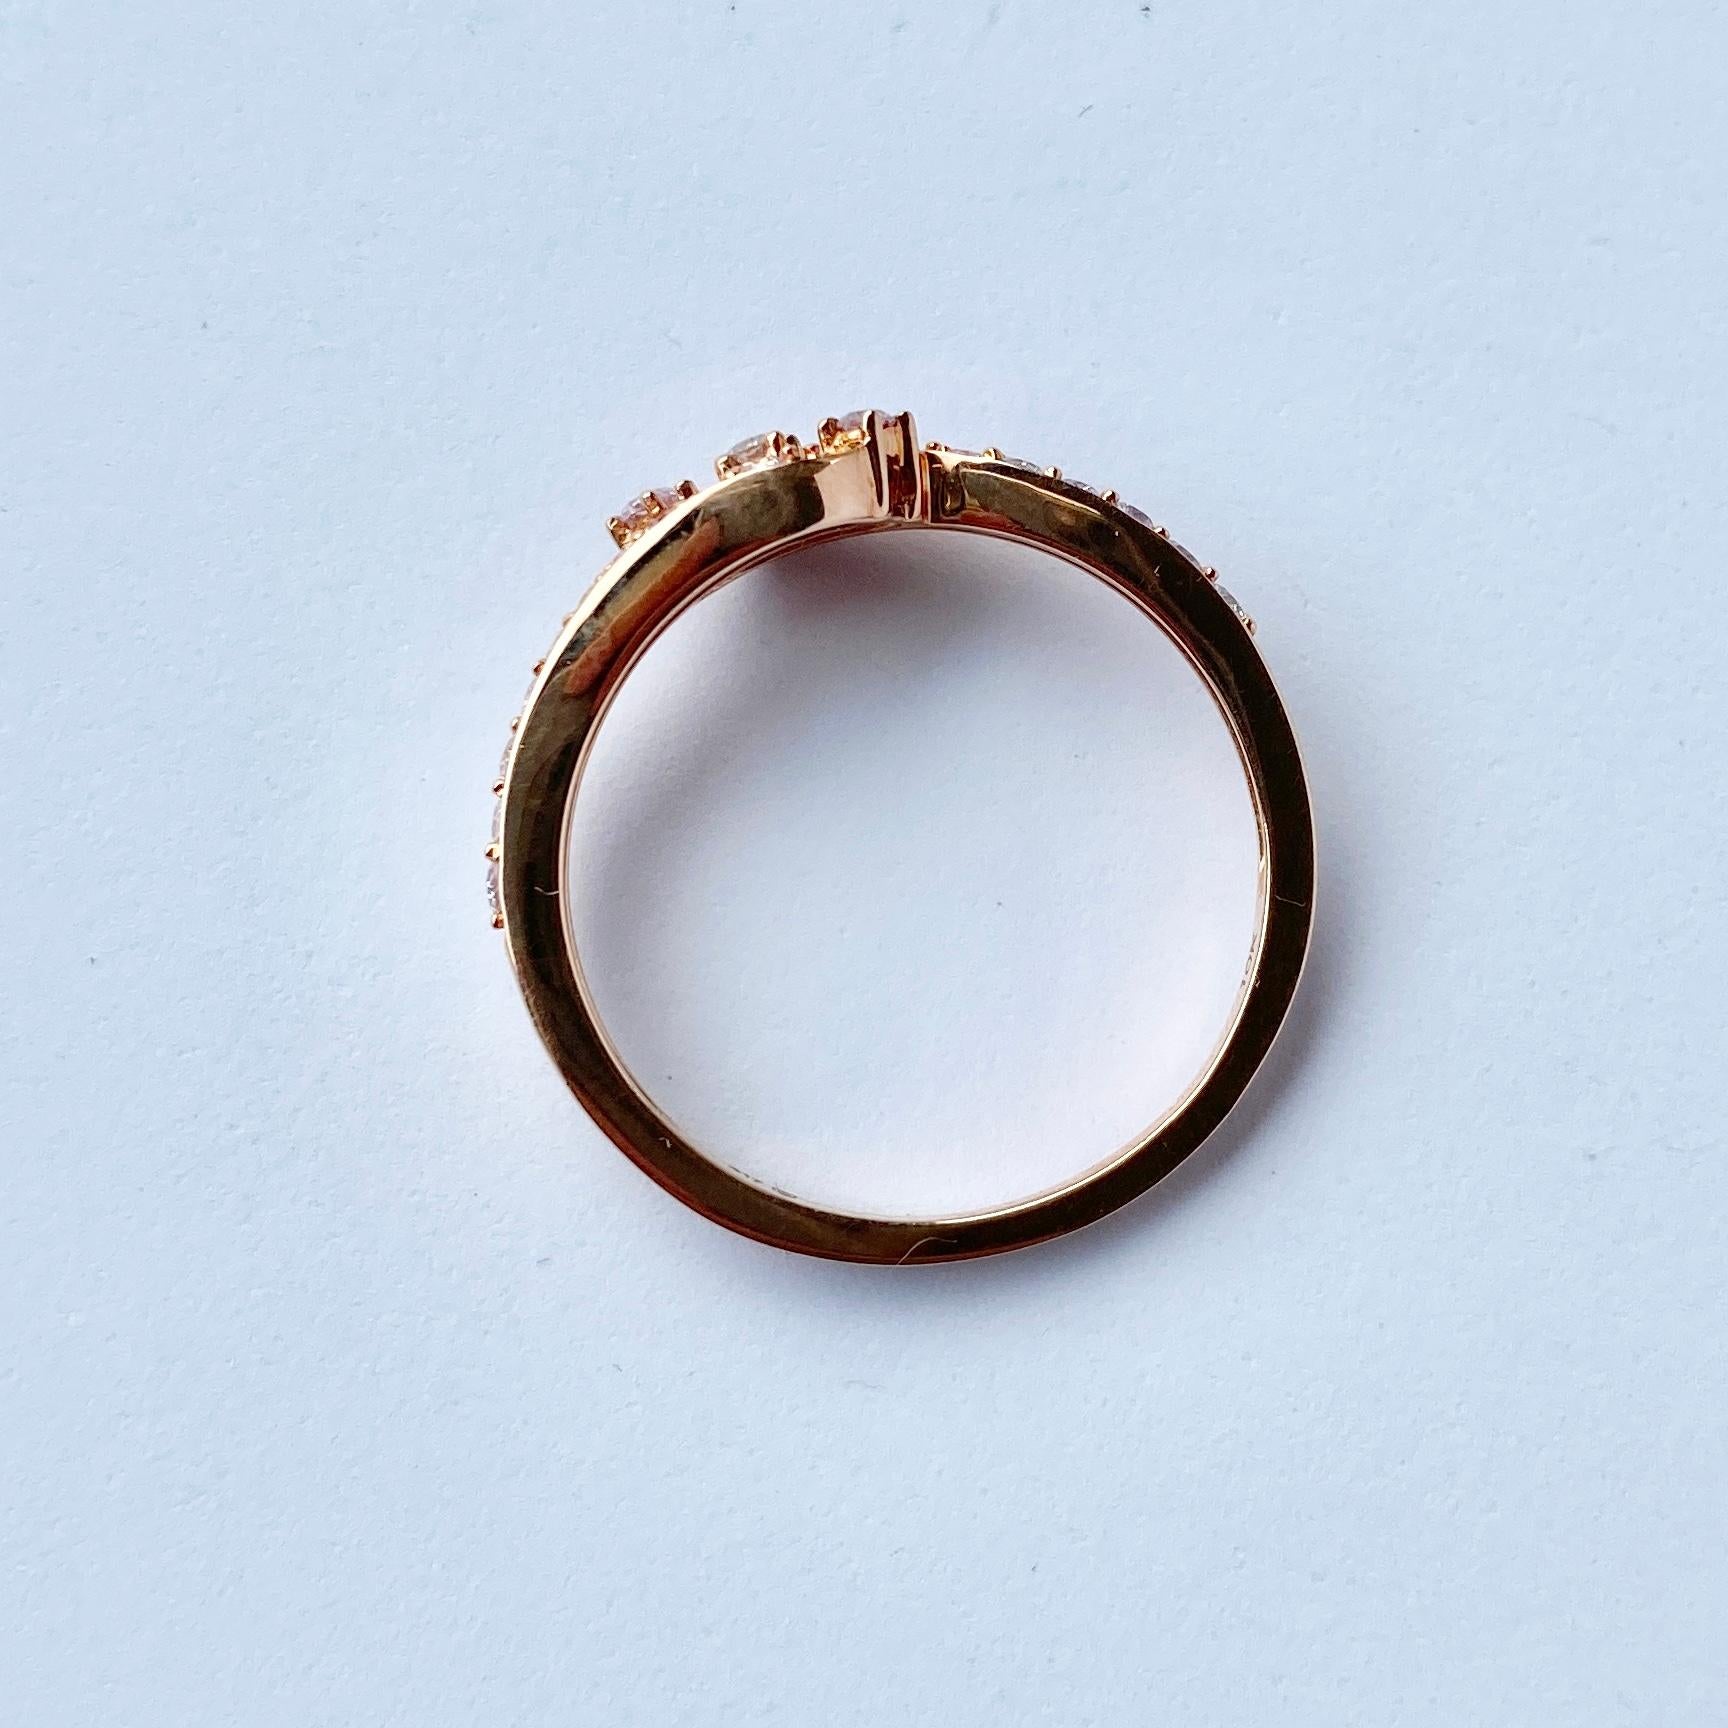 This gorgeous ring features a cross over design and has shimmering diamonds set within the 9ct rose gold. The diamonds total approx 70pts.

Ring Size: S or 9

Weight:2.3g